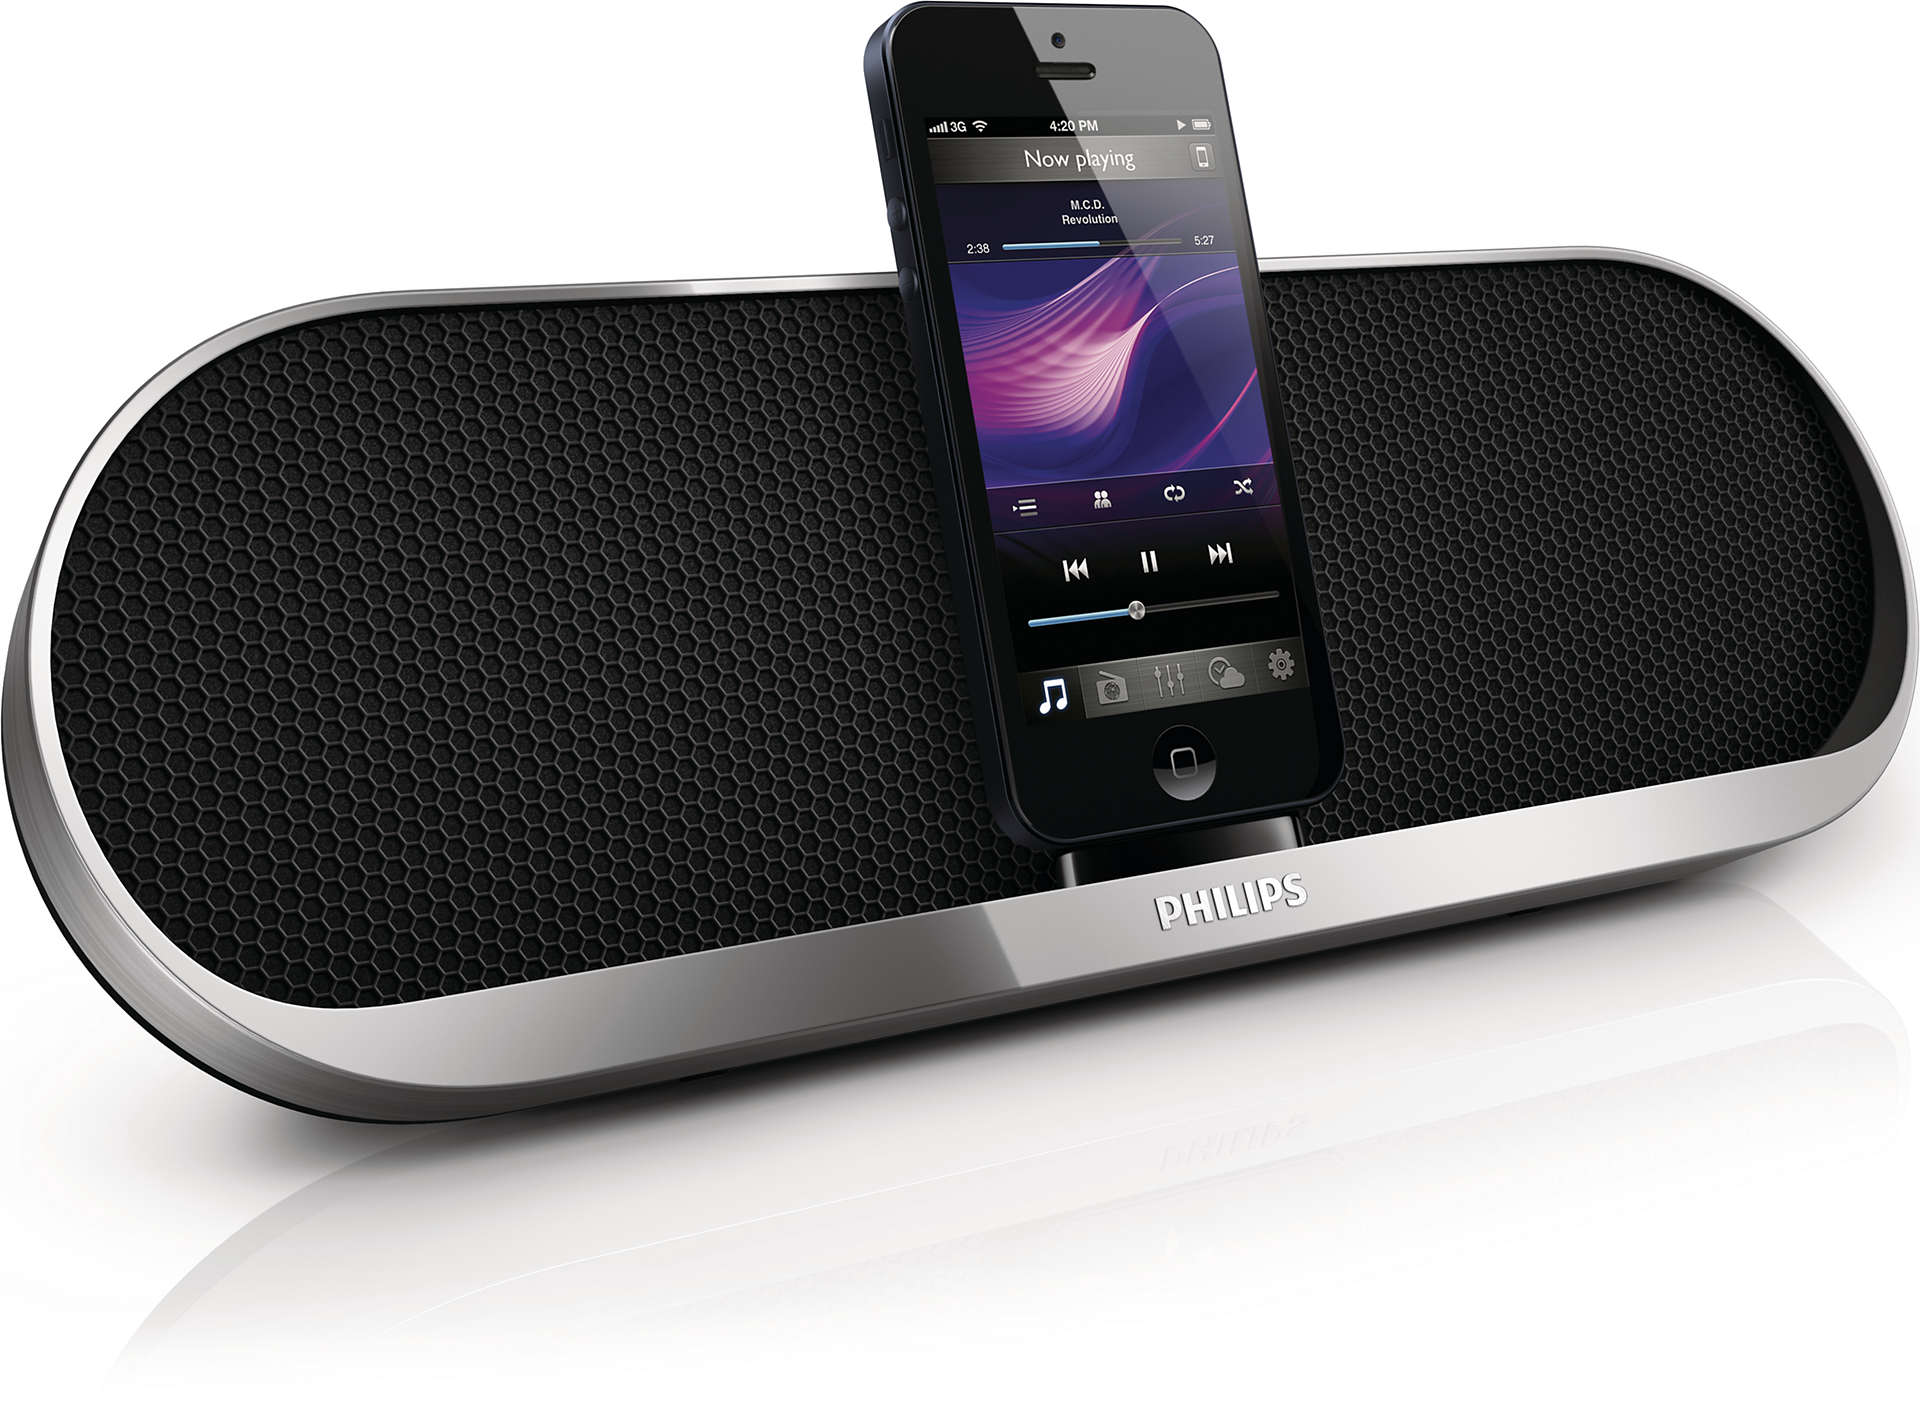 FREE -Philips docking speaker with Bluetooth